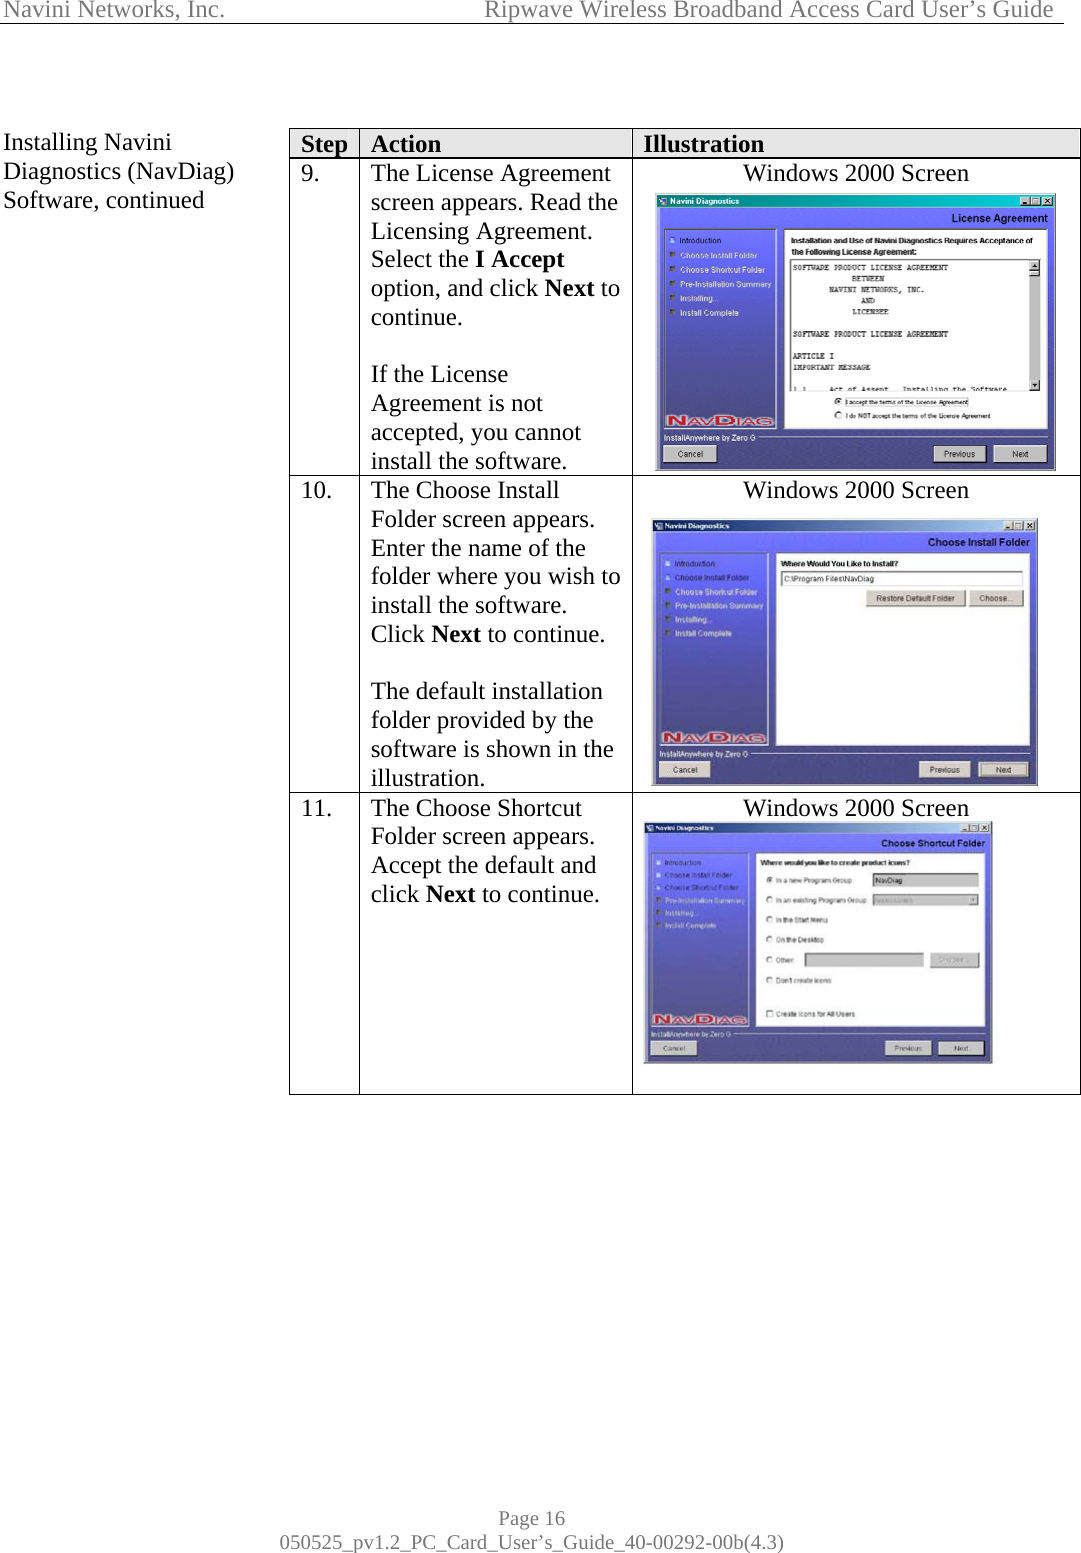 Navini Networks, Inc.            Ripwave Wireless Broadband Access Card User’s Guide Page 16 050525_pv1.2_PC_Card_User’s_Guide_40-00292-00b(4.3)  Installing Navini Diagnostics (NavDiag) Software, continued                                            Step  Action  Illustration 9.  The License Agreement screen appears. Read the Licensing Agreement. Select the I Accept option, and click Next to continue.  If the License Agreement is not accepted, you cannot install the software. Windows 2000 Screen  10.  The Choose Install Folder screen appears. Enter the name of the folder where you wish to install the software. Click Next to continue.  The default installation folder provided by the software is shown in the illustration. Windows 2000 Screen  11.  The Choose Shortcut Folder screen appears. Accept the default and click Next to continue.       Windows 2000 Screen           